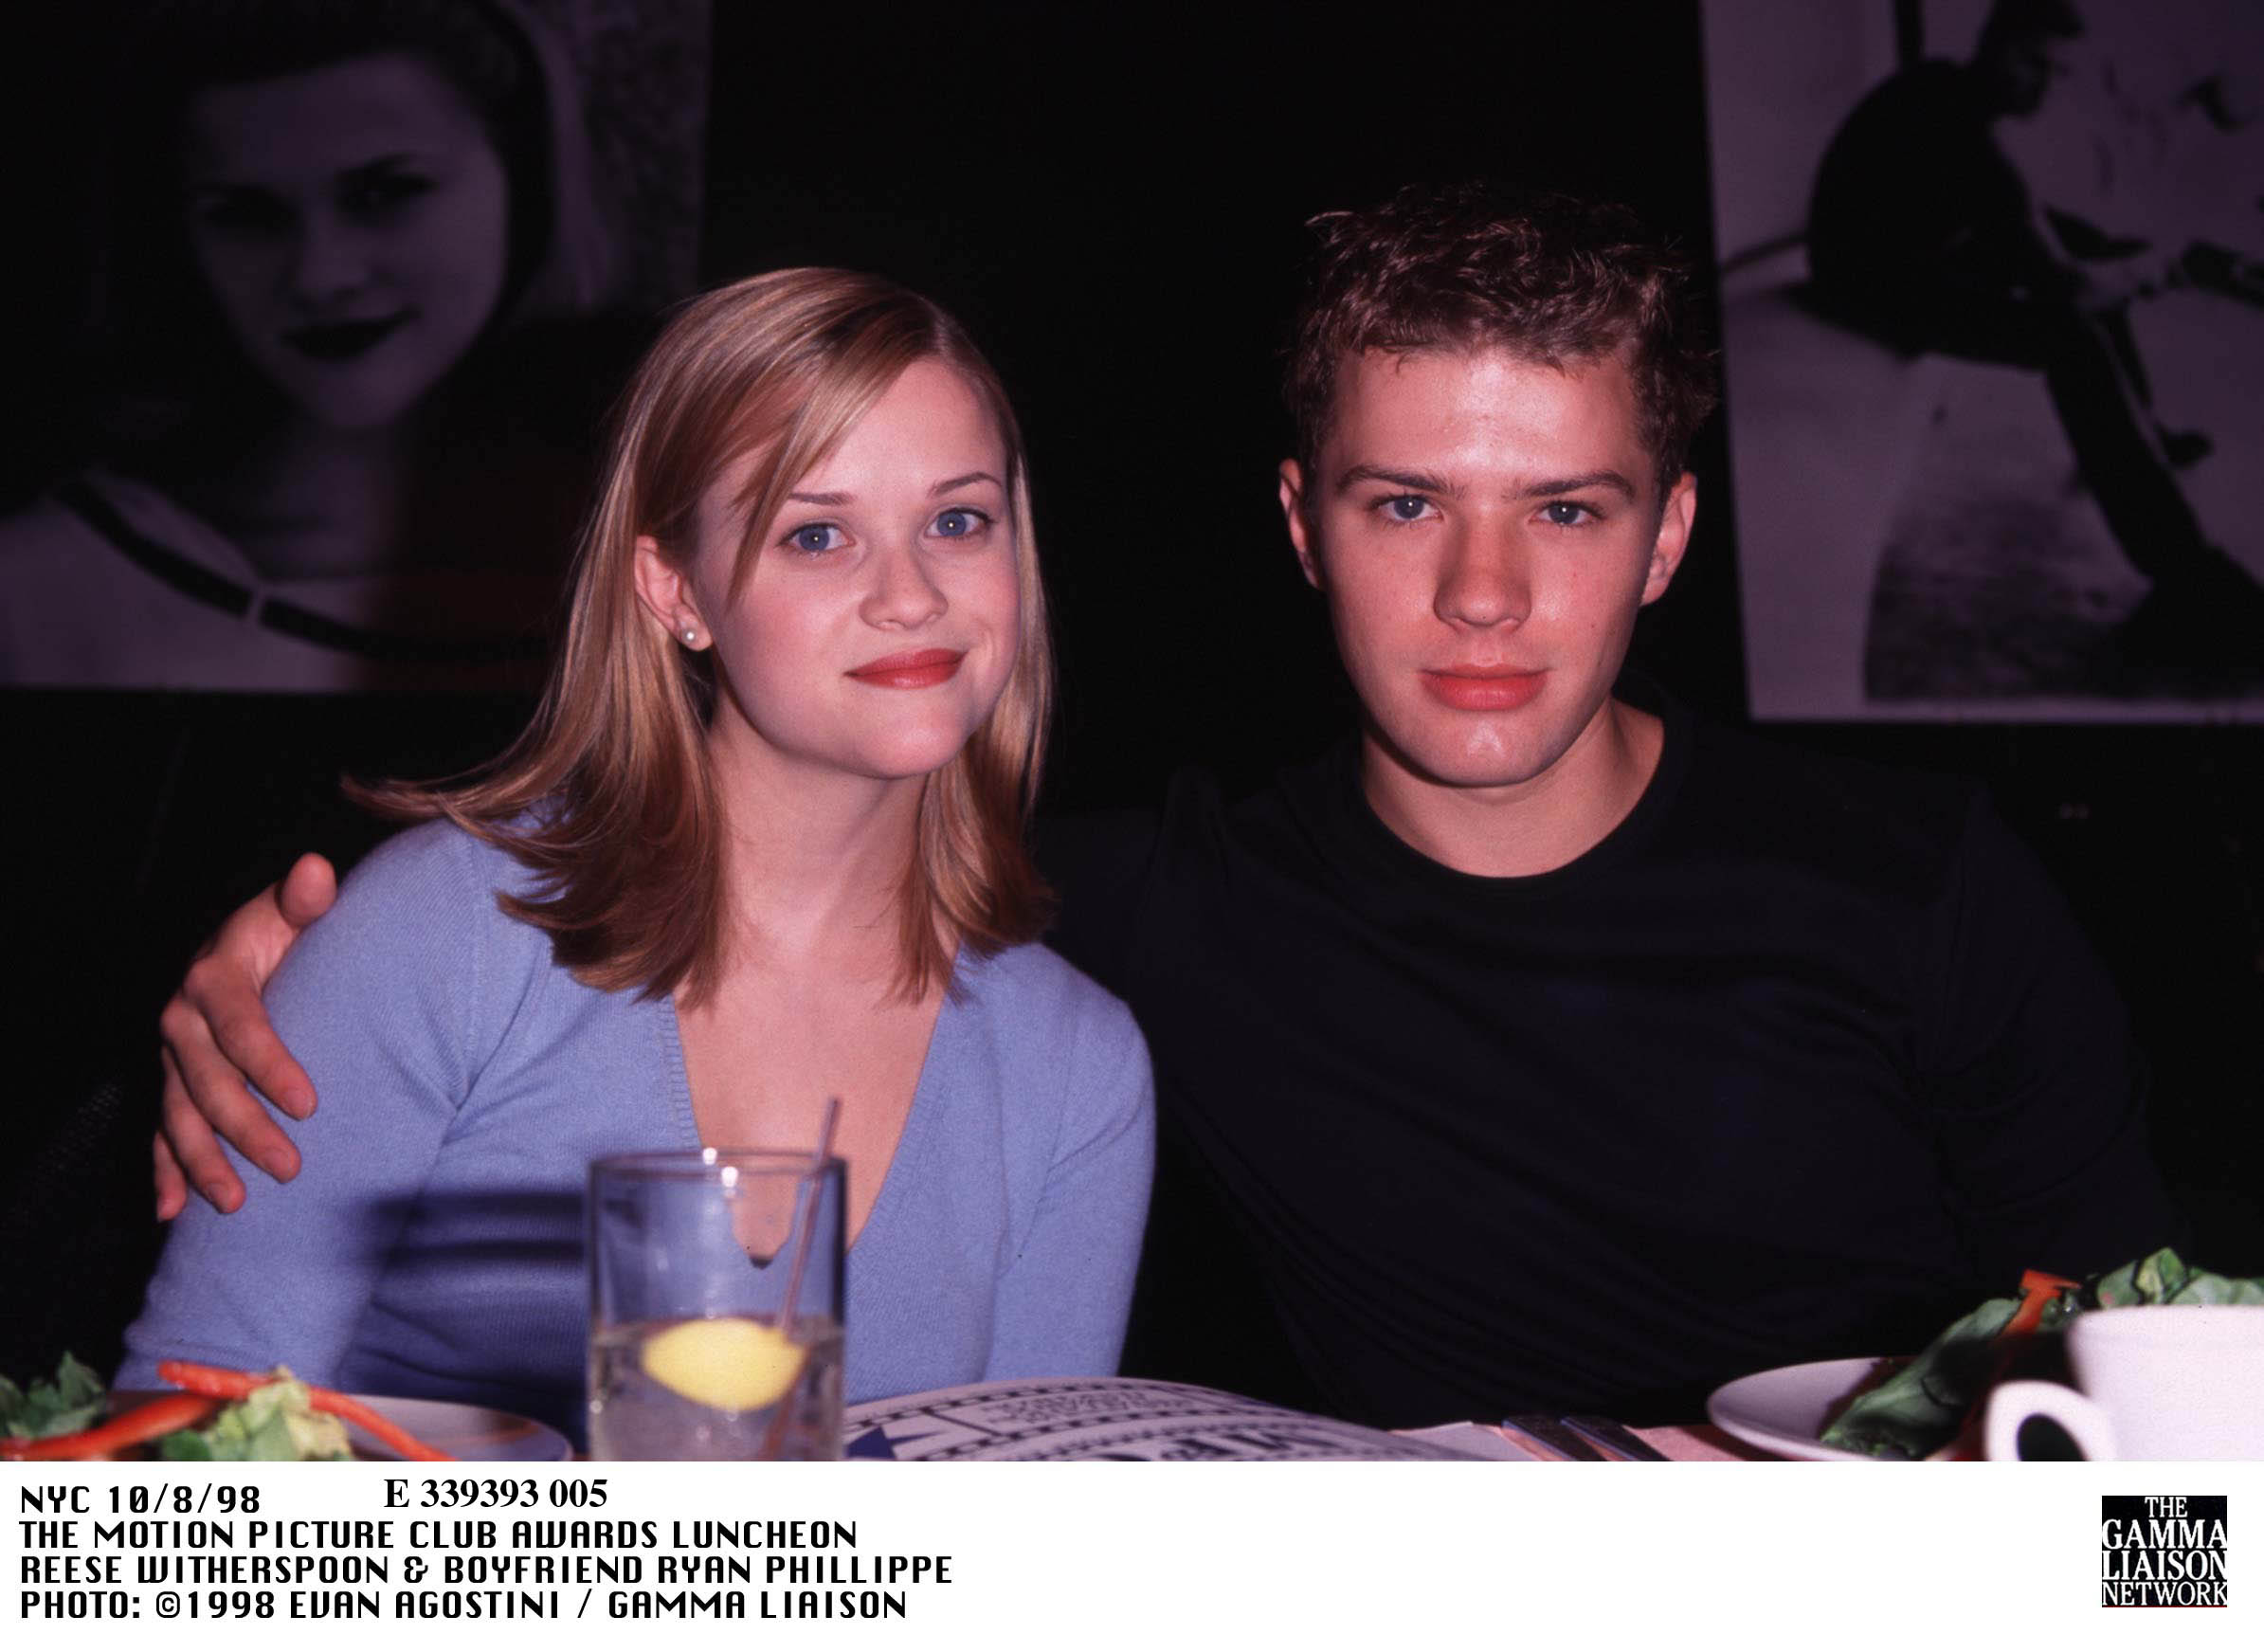 Reese Witherspoon and Ryan Philippe at the Motion Picture Club Awards Luncheon in New York on October 8, 1998 | Source: Getty Images